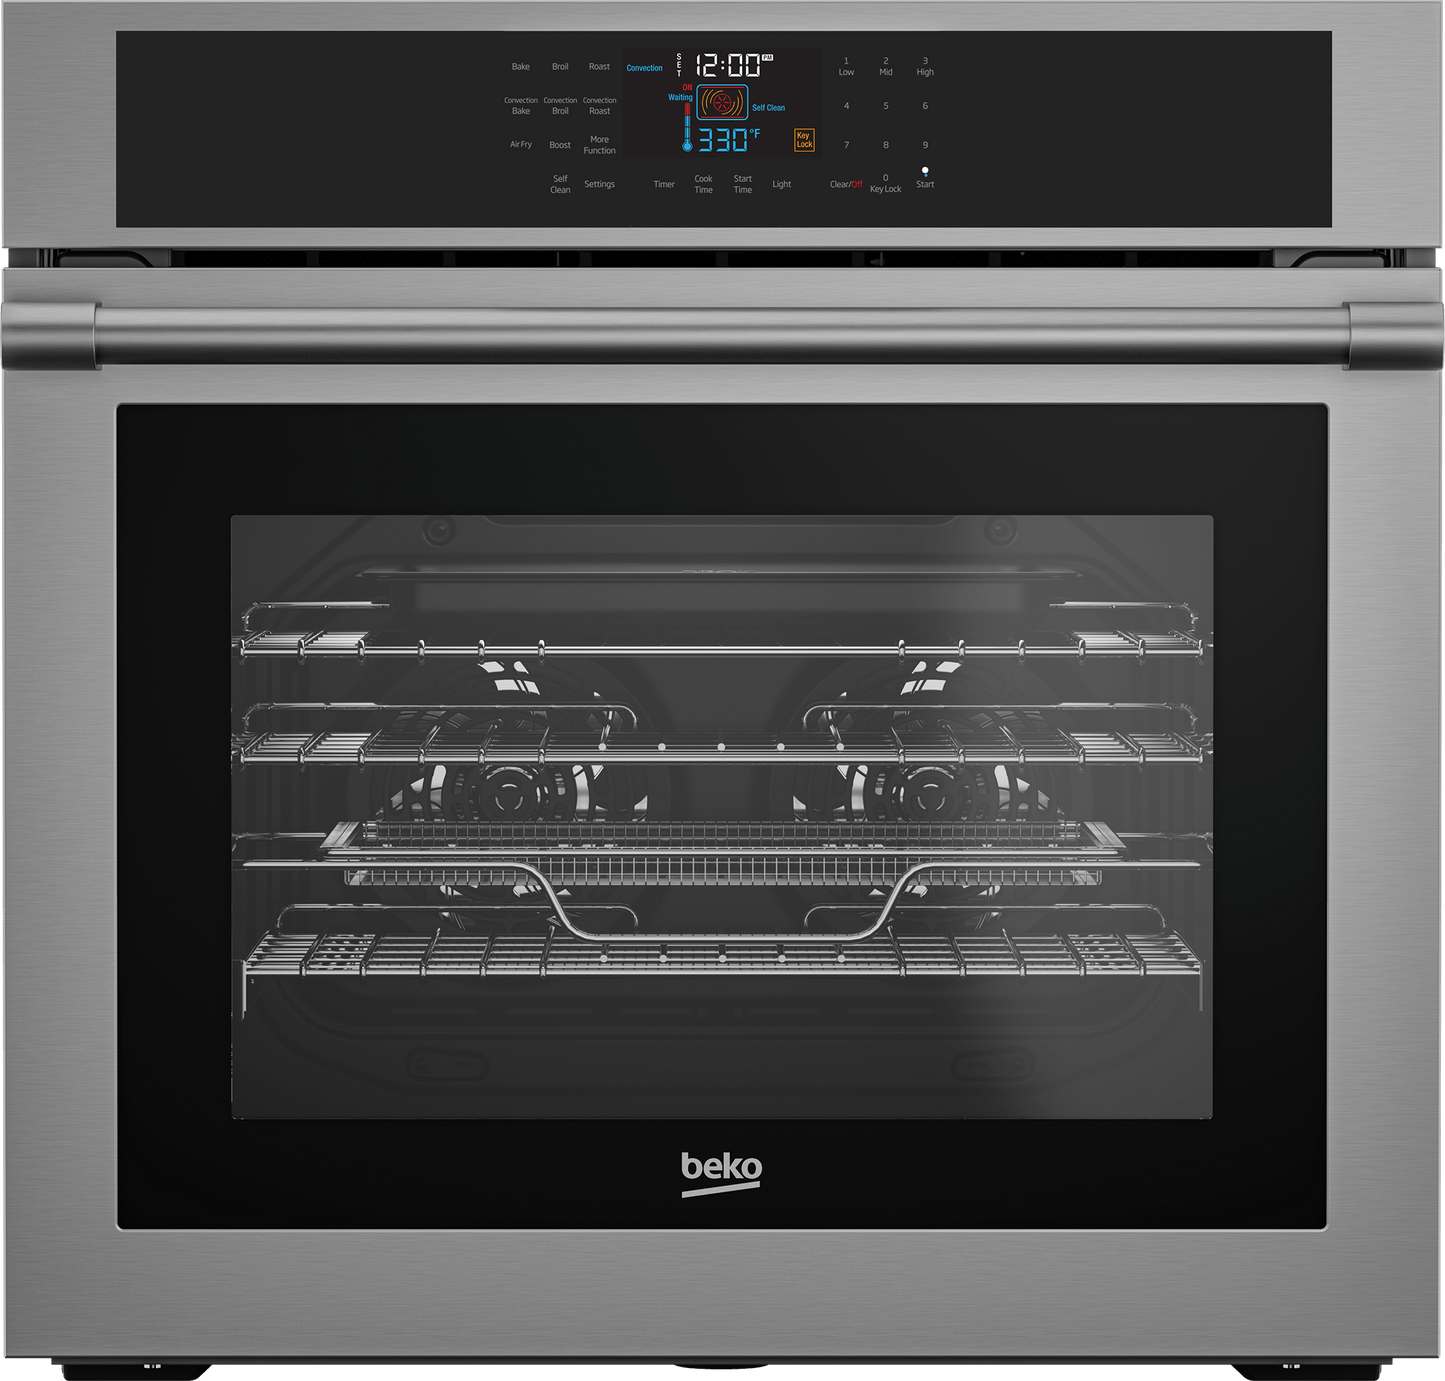 Beko WOS30200SS 30" Stainless Steel Wall Oven